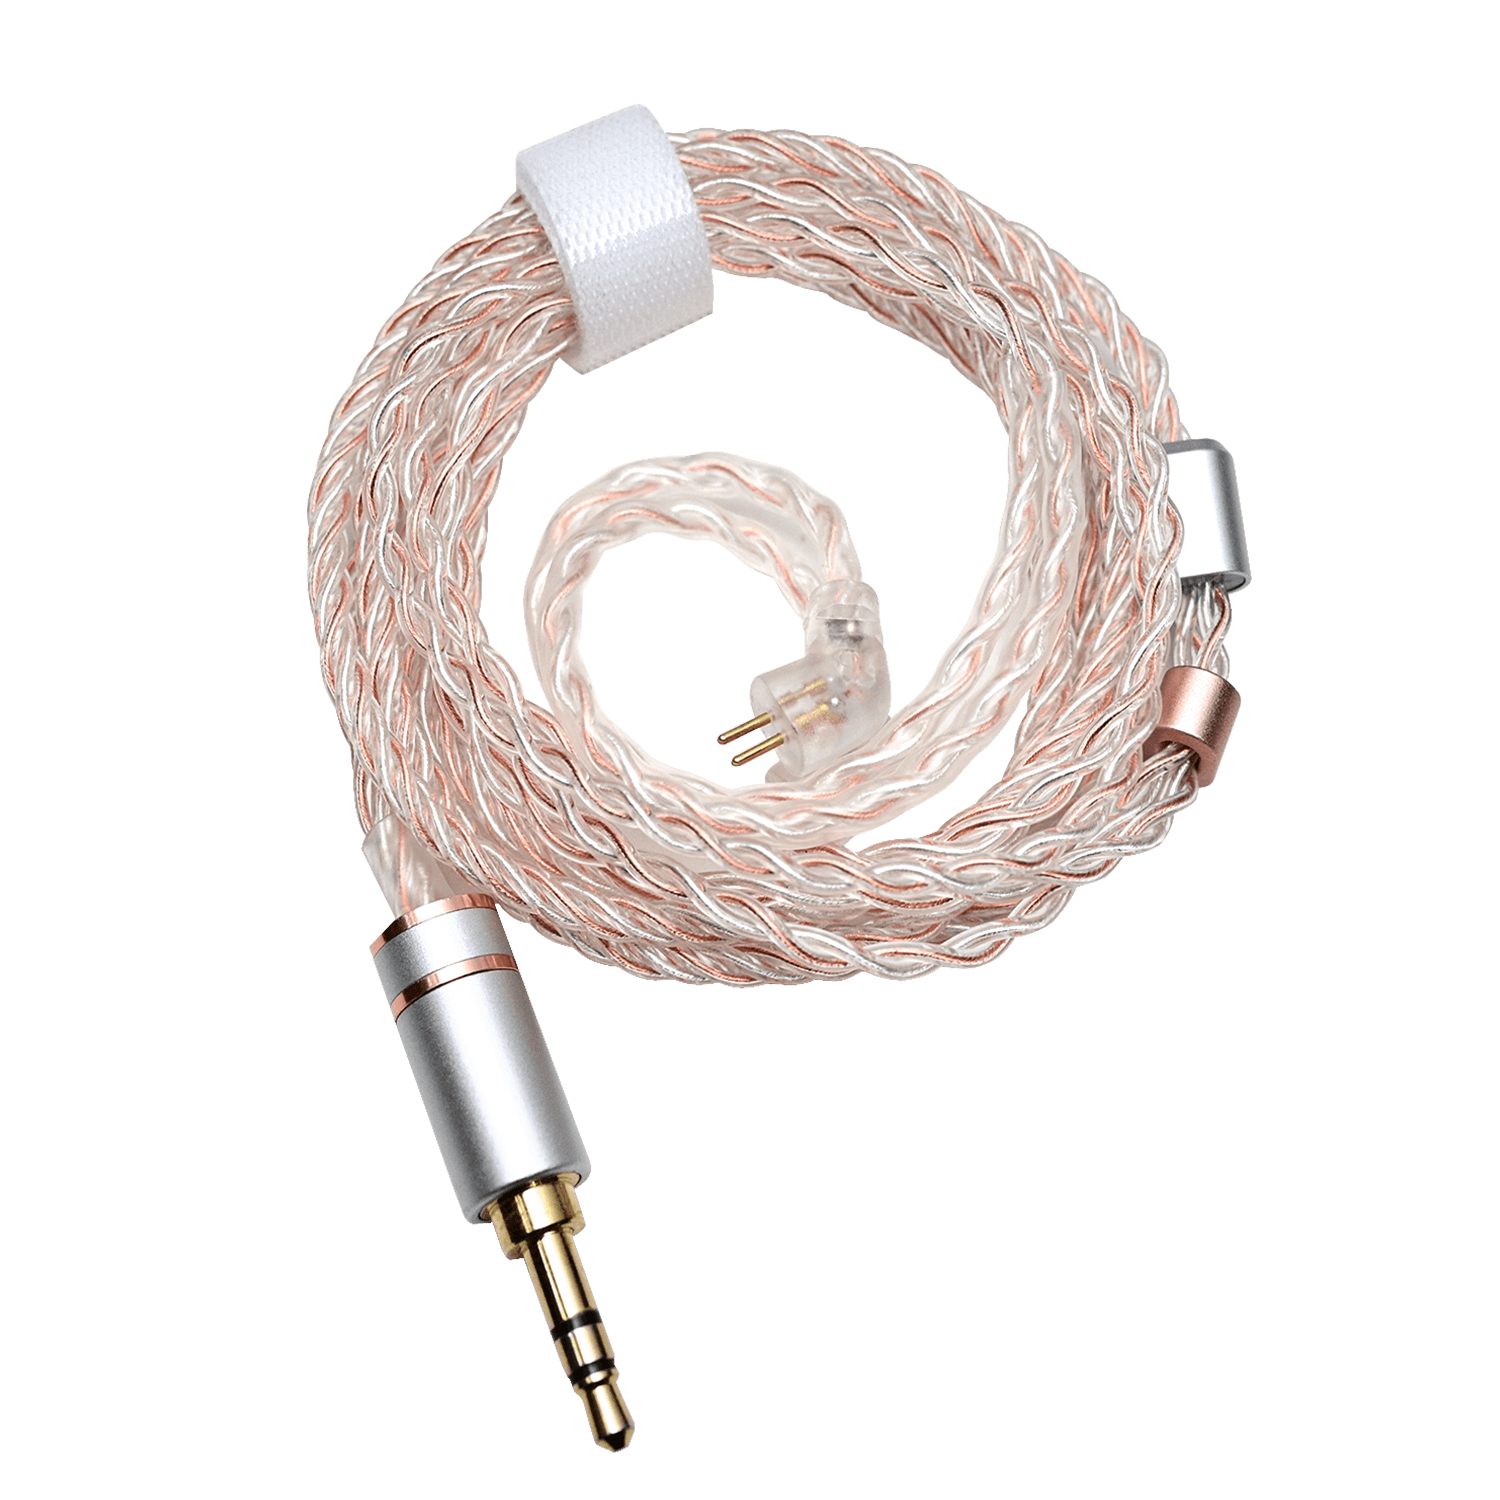 Hidizs BL4.4A-RC Single Crystal Copper Balanced Earphone Upgrade Cable